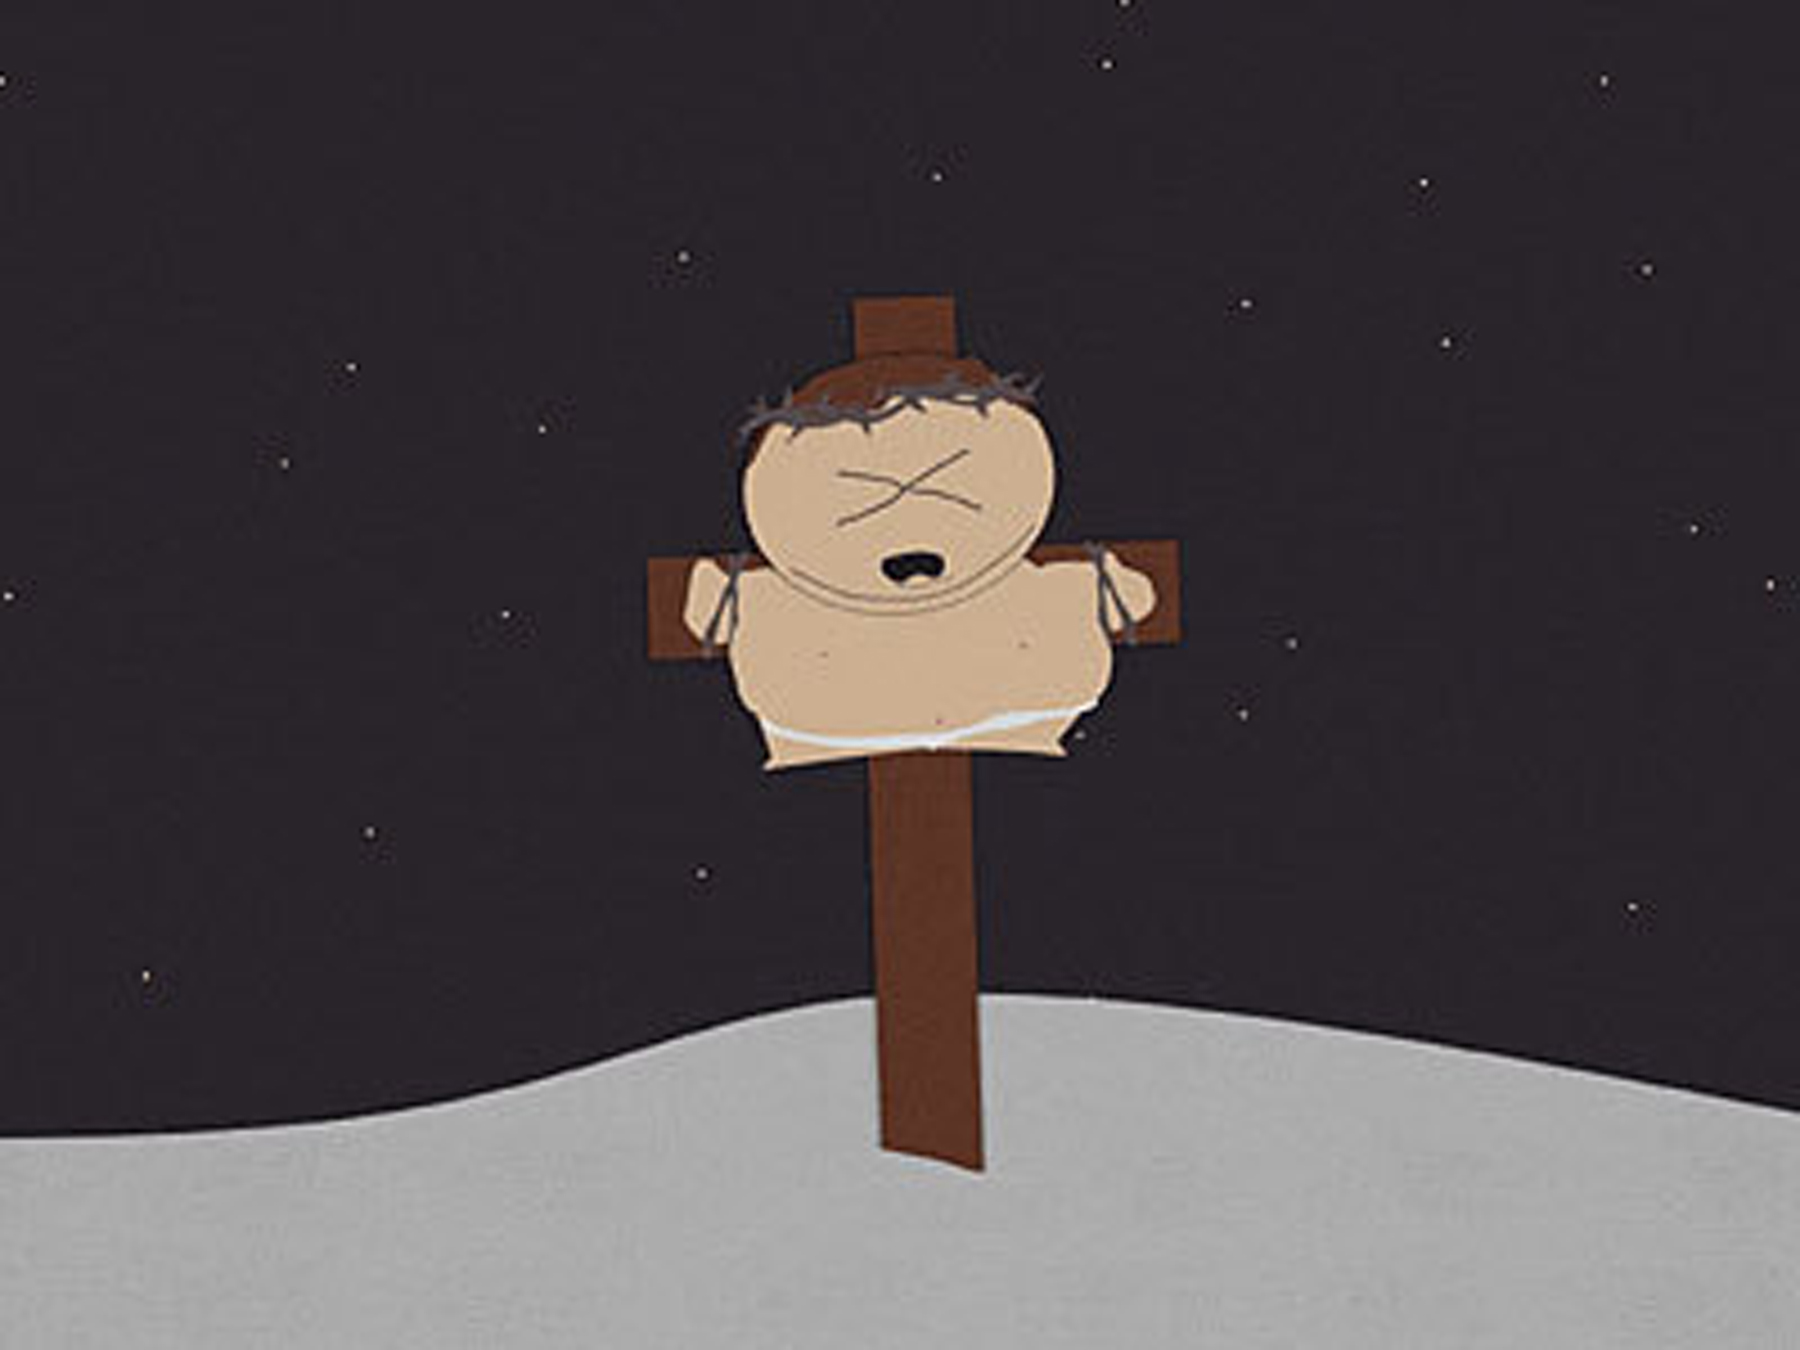 Download Free HQ South park Wallpapers - hqwallbase.pw